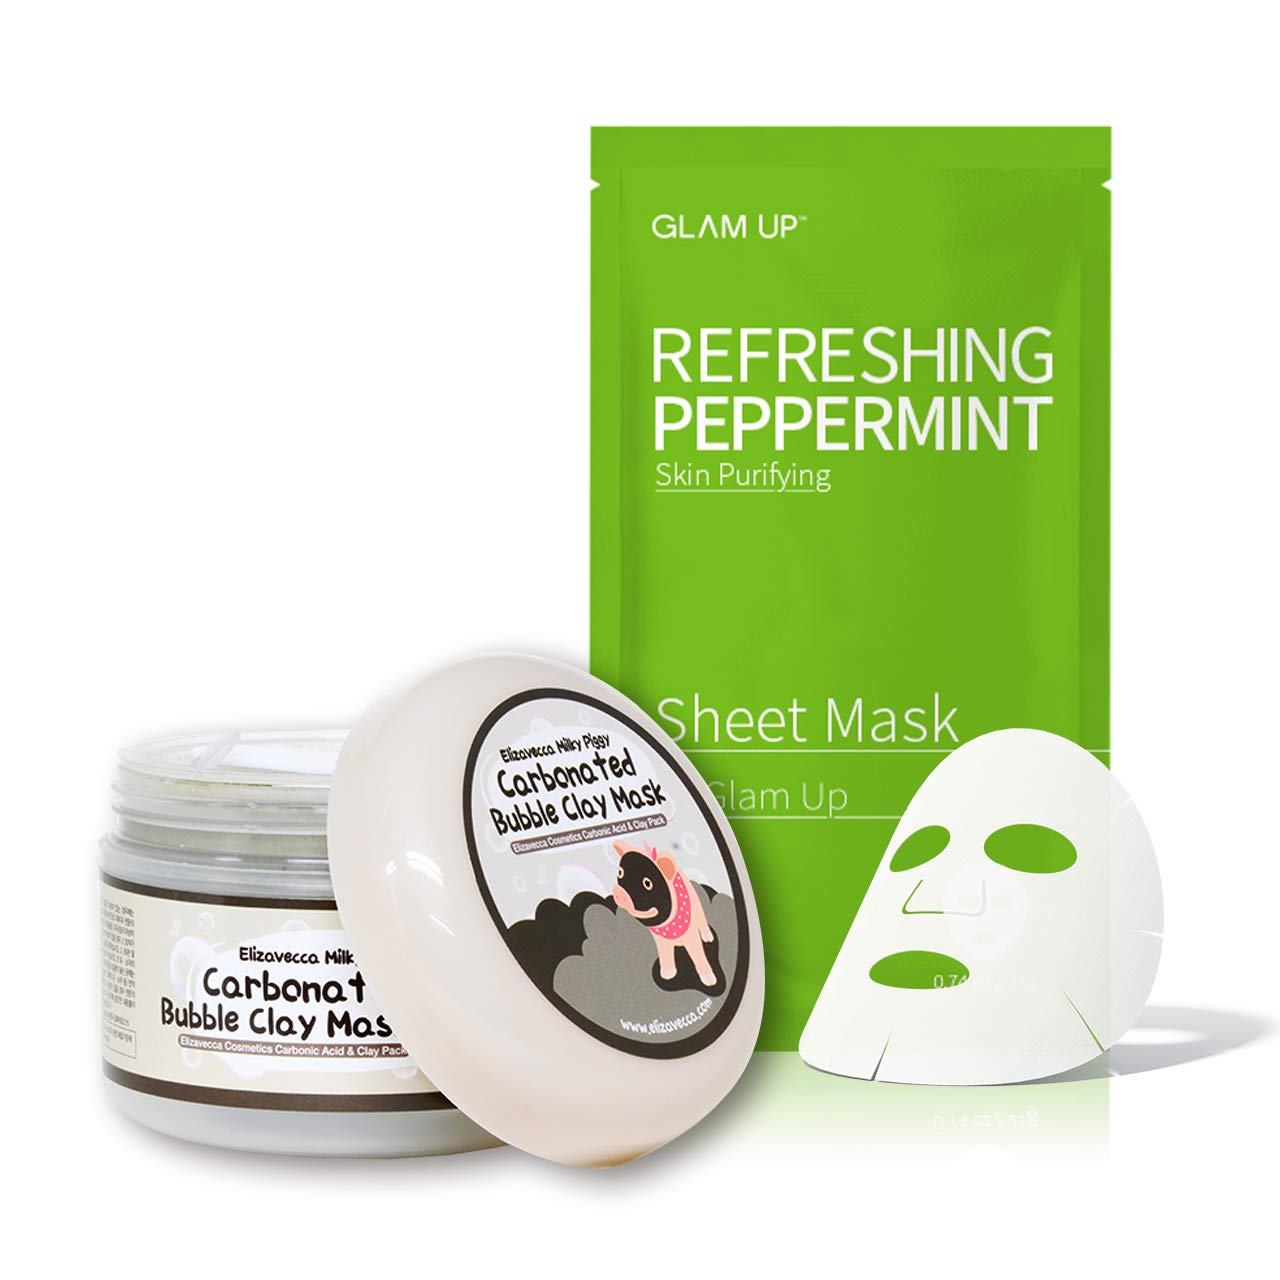 Elizavecca Milky Piggy Carbonated Bubble Clay Mask - Pore Cleansing & Sheet Mask by Glam Up BTS Refreshing Peppermint - Calming, Refreshing, Purifying, pH Balancing Daily Skin Therapy – SET